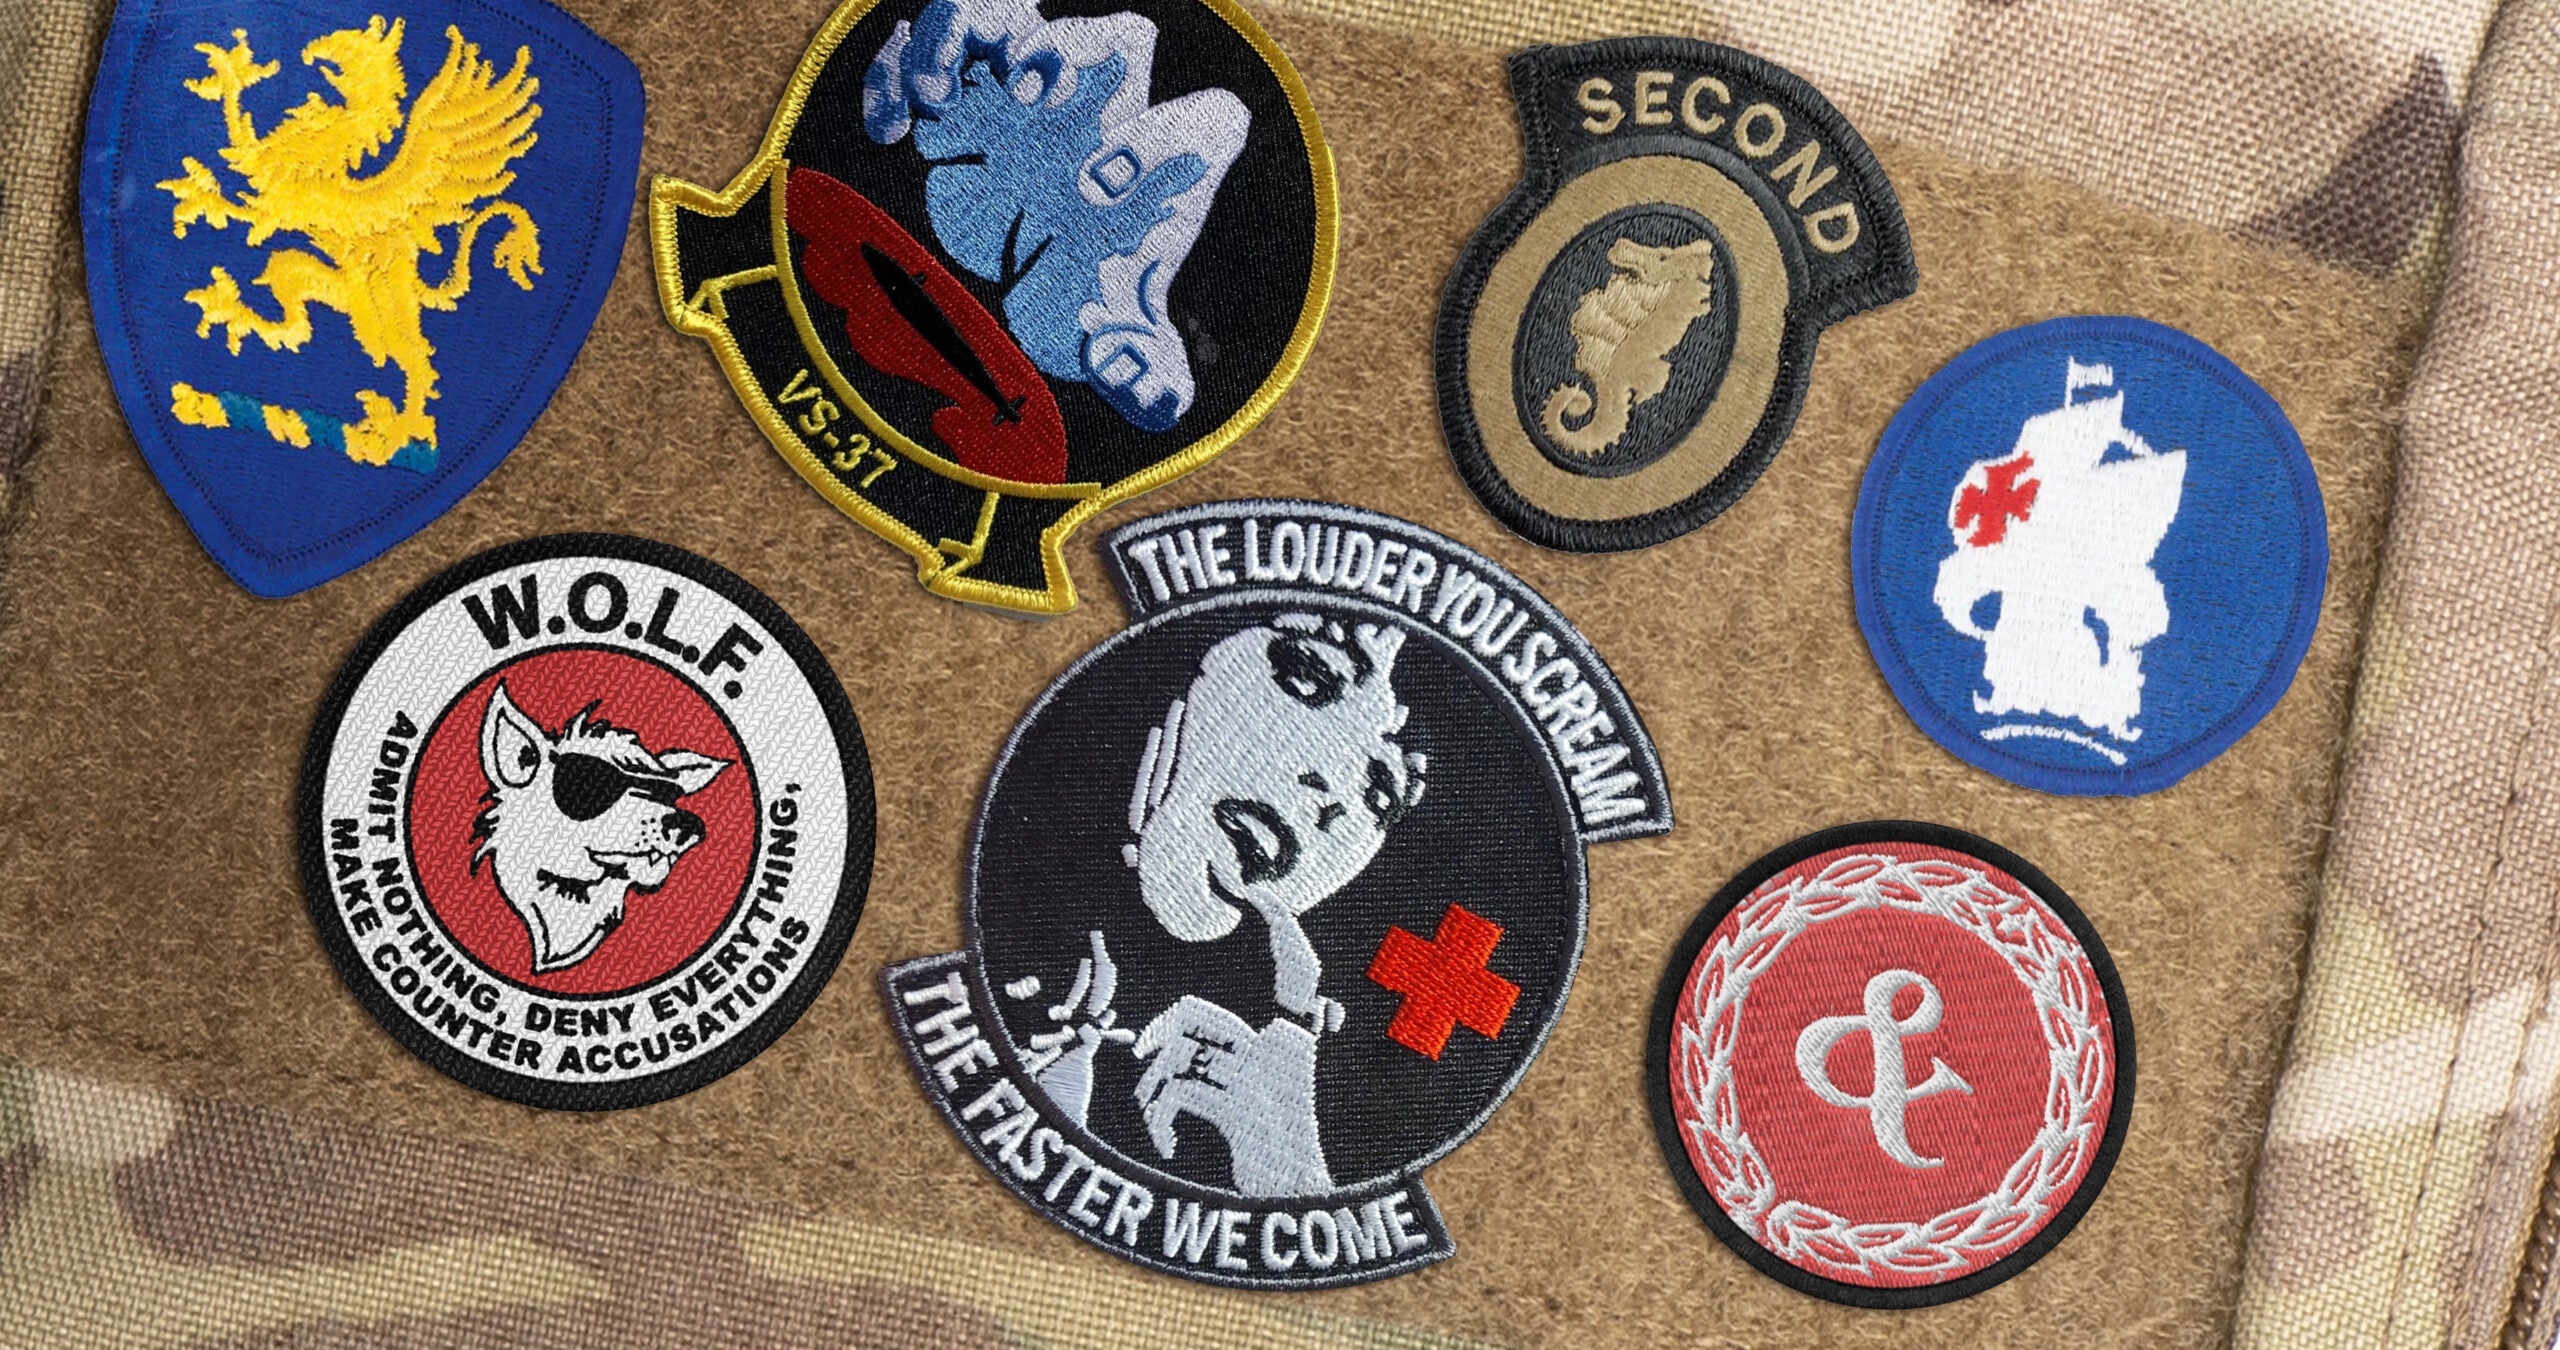 These are the best and most absurd US military unit patches